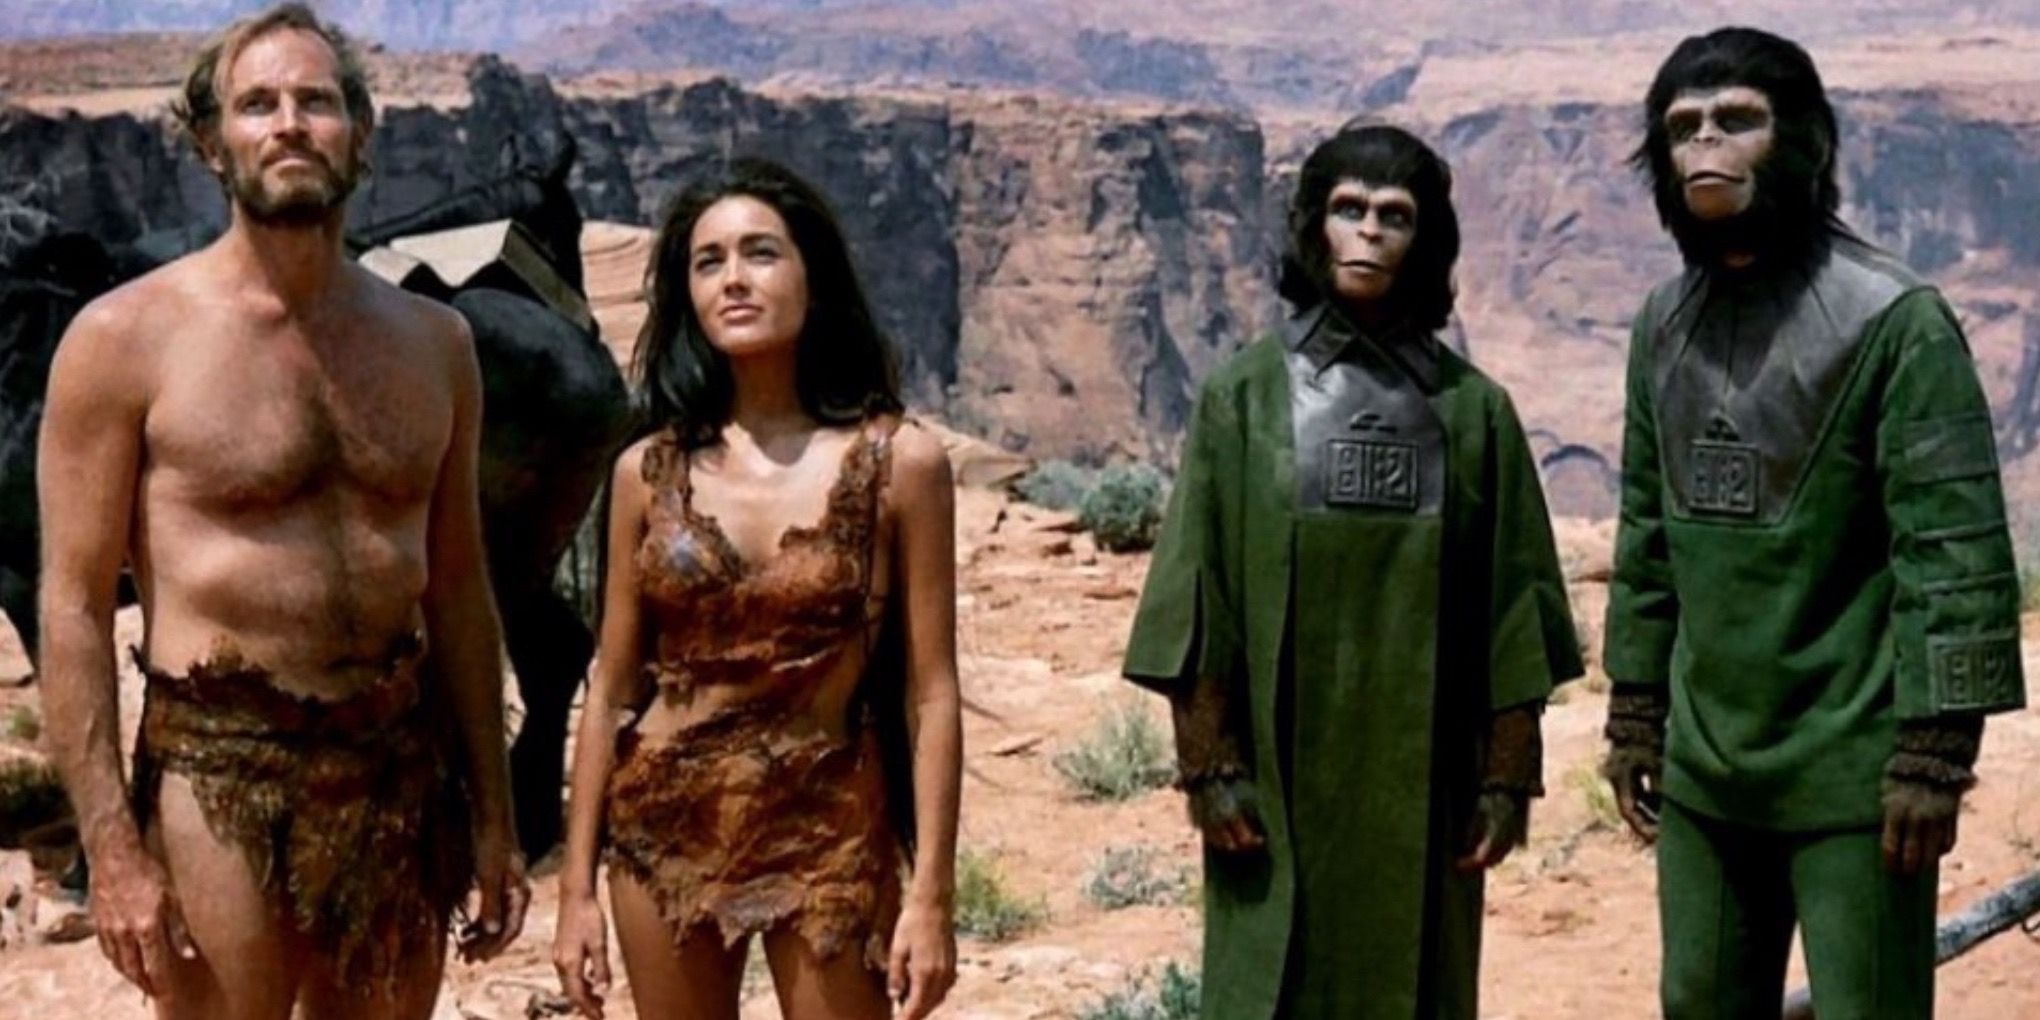 The cast of Planet of the Apes (1968)